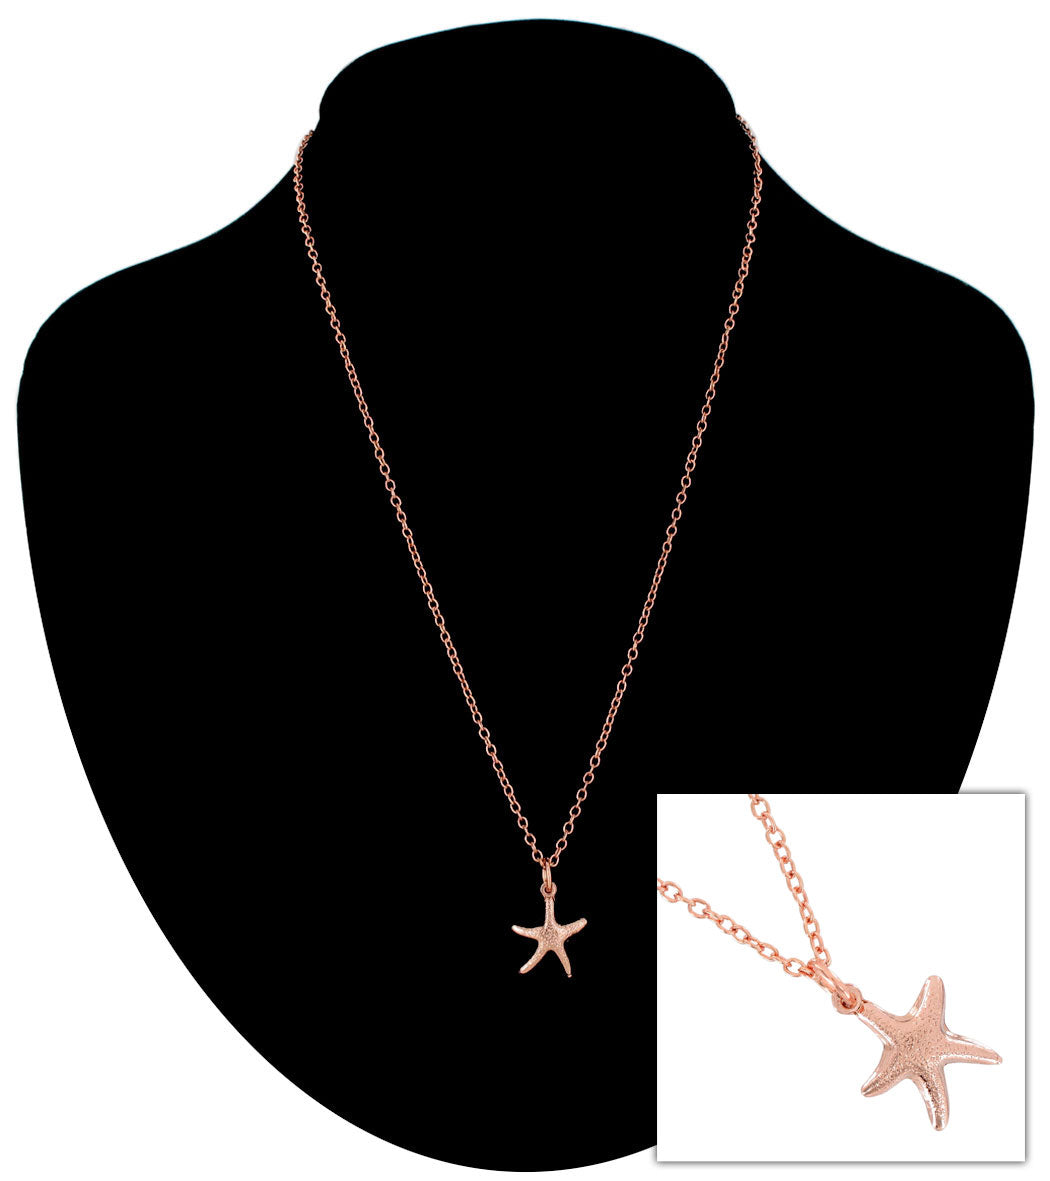 Ky & Co Made in USA Starfish Nautical Charm Pendant Necklace 18" Rose Gold Tone